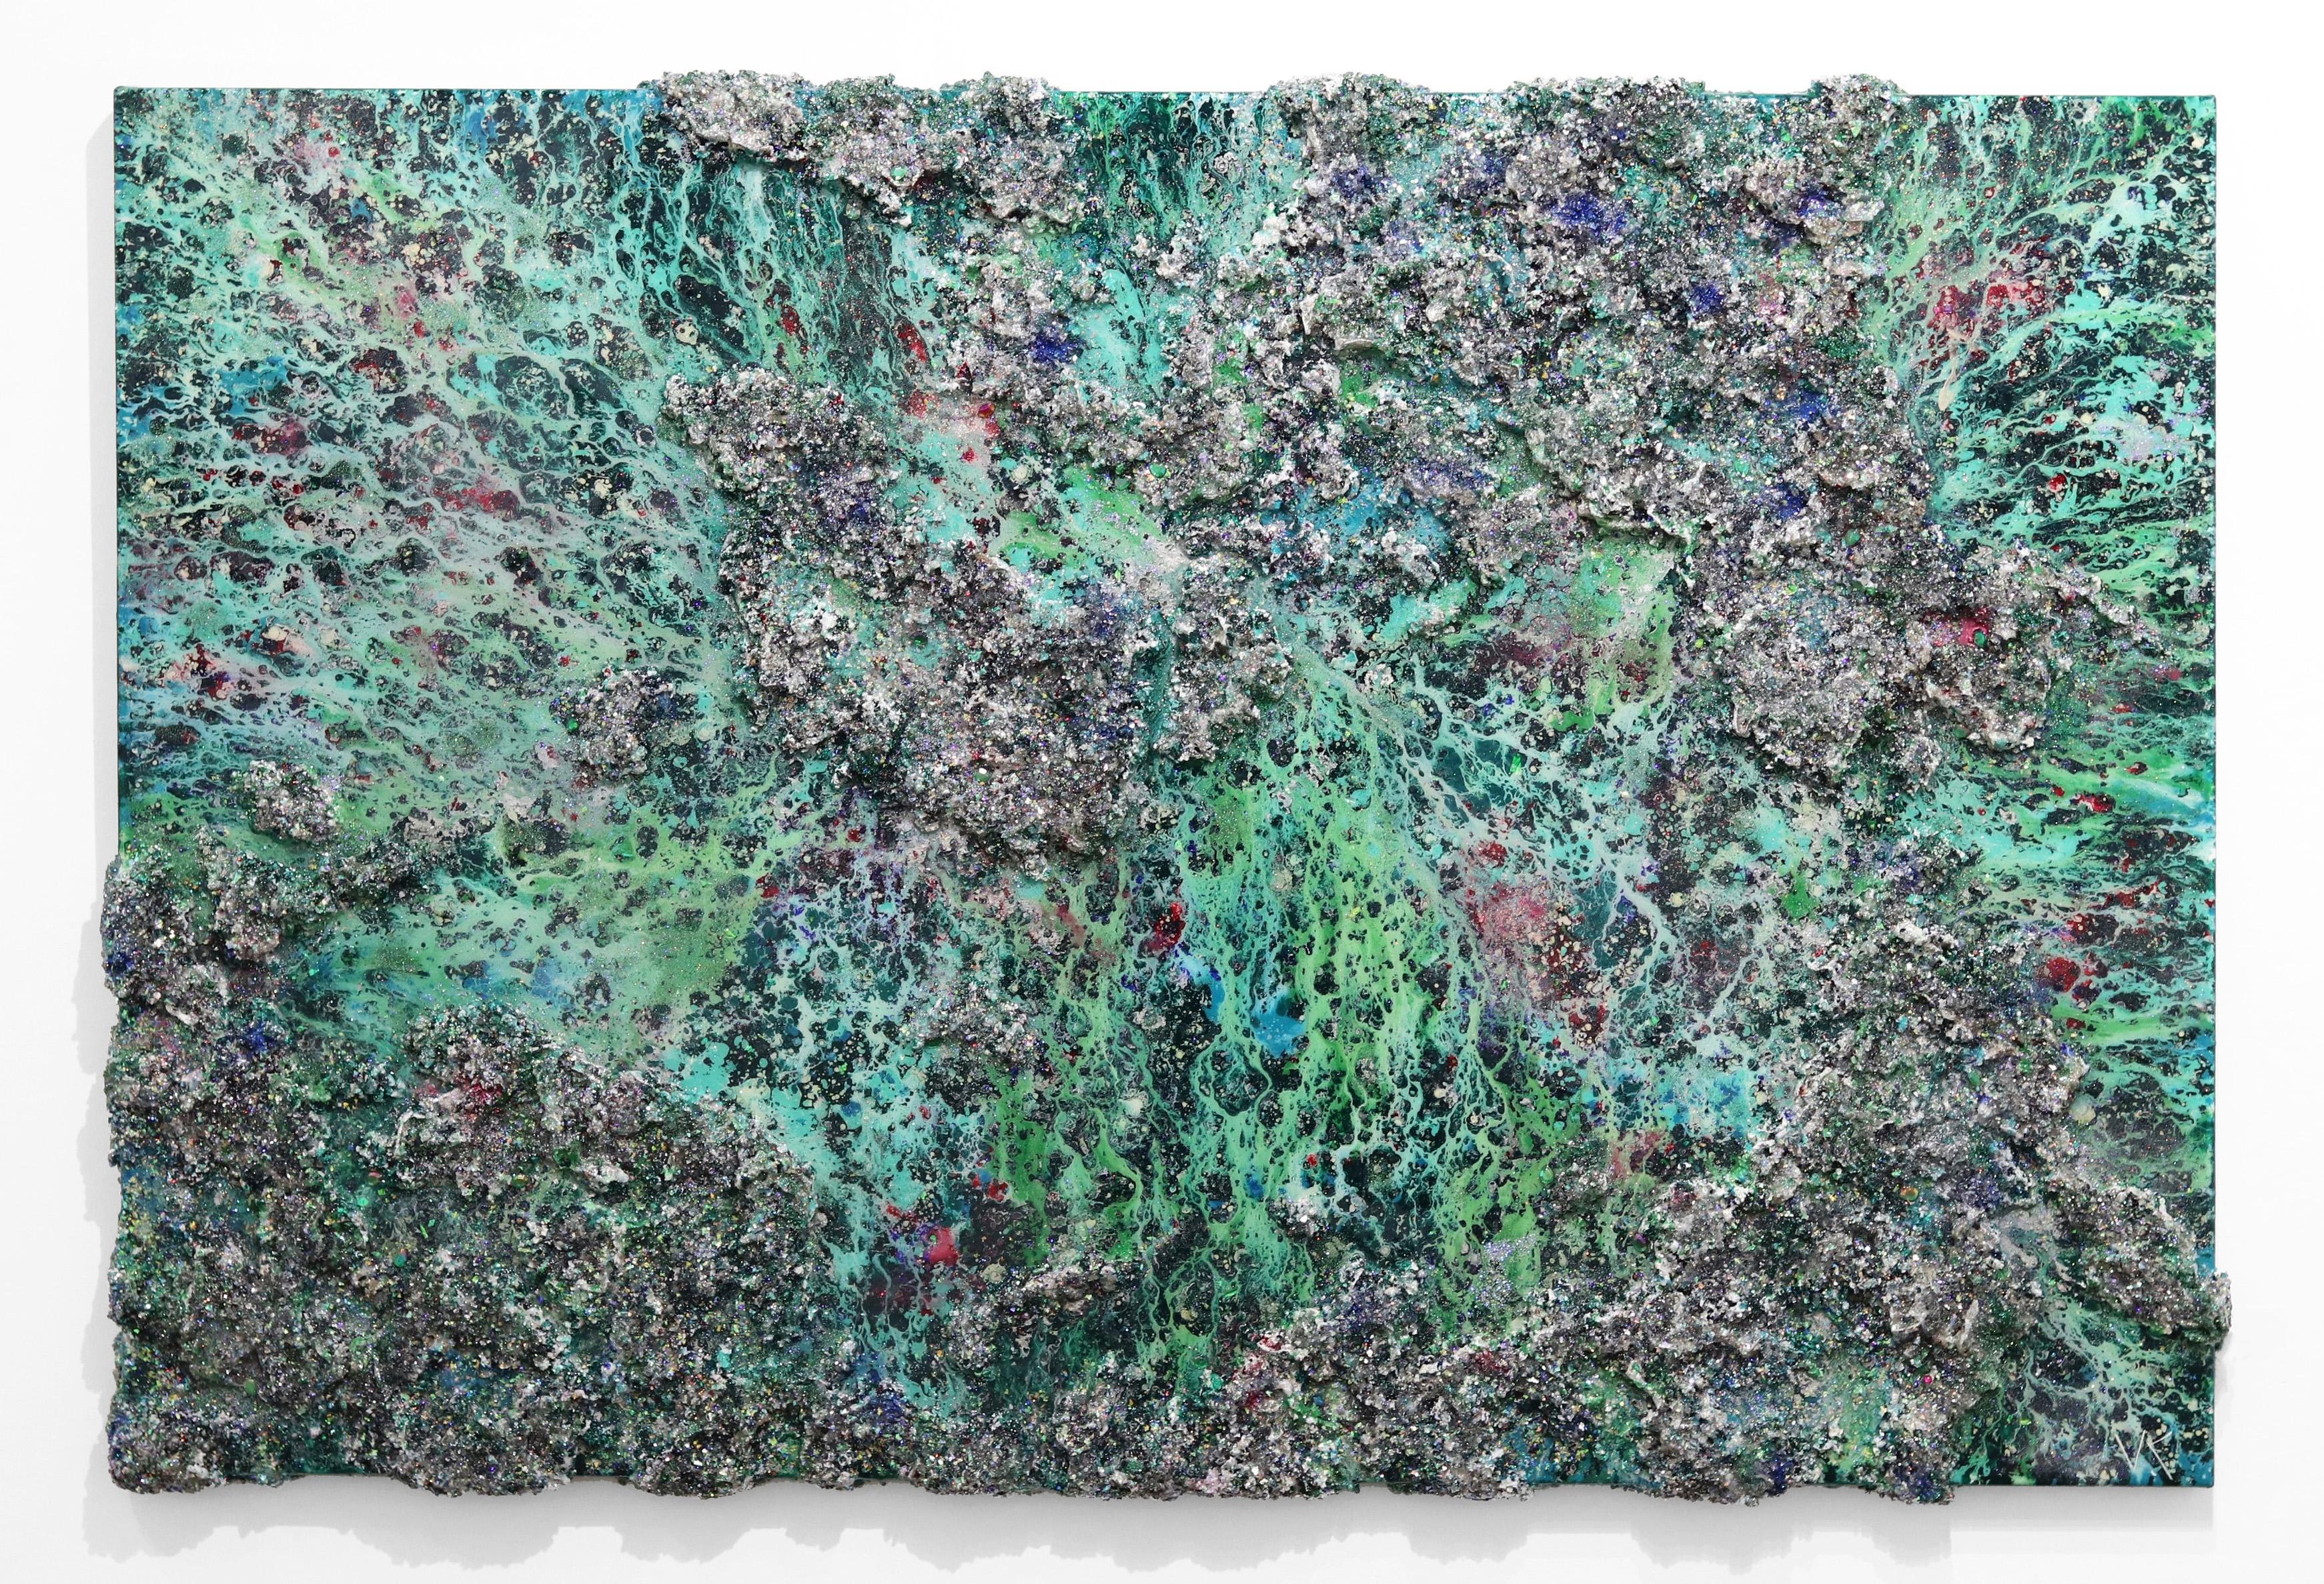 Victoria Kovalenchikova Landscape Painting - The World VI-II - Large Sculptural Green Oil, Mixed Media, and Resin Painting